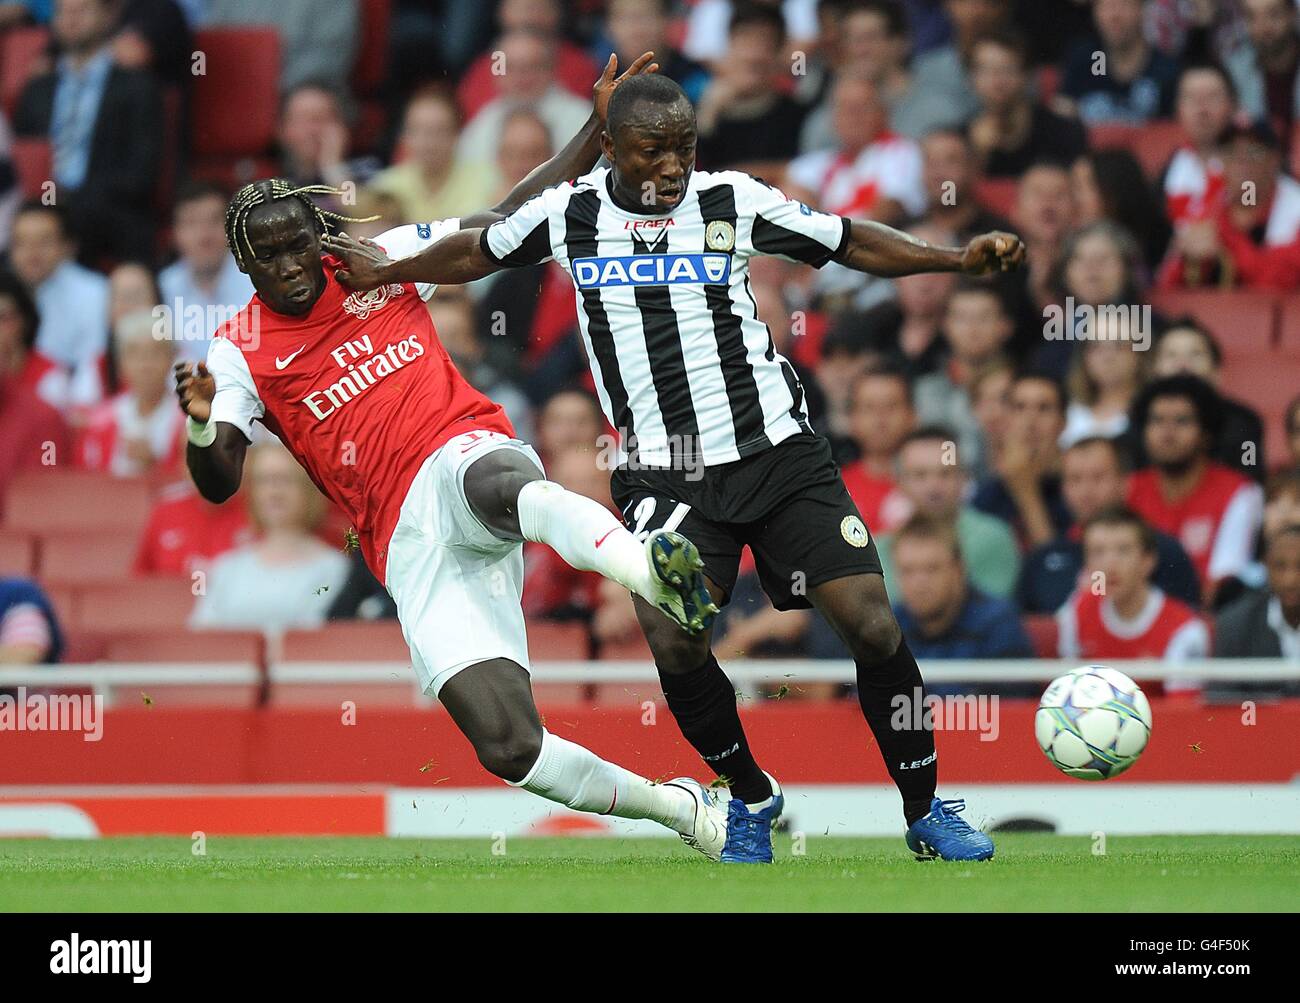 Soccer - UEFA Champions League - Play Offs - First Leg - Arsenal v Udinese - Emirates Stadium. Arsenal's Bacary Sagna (left) and Udinese's Pablo Armero battle for the ball Stock Photo